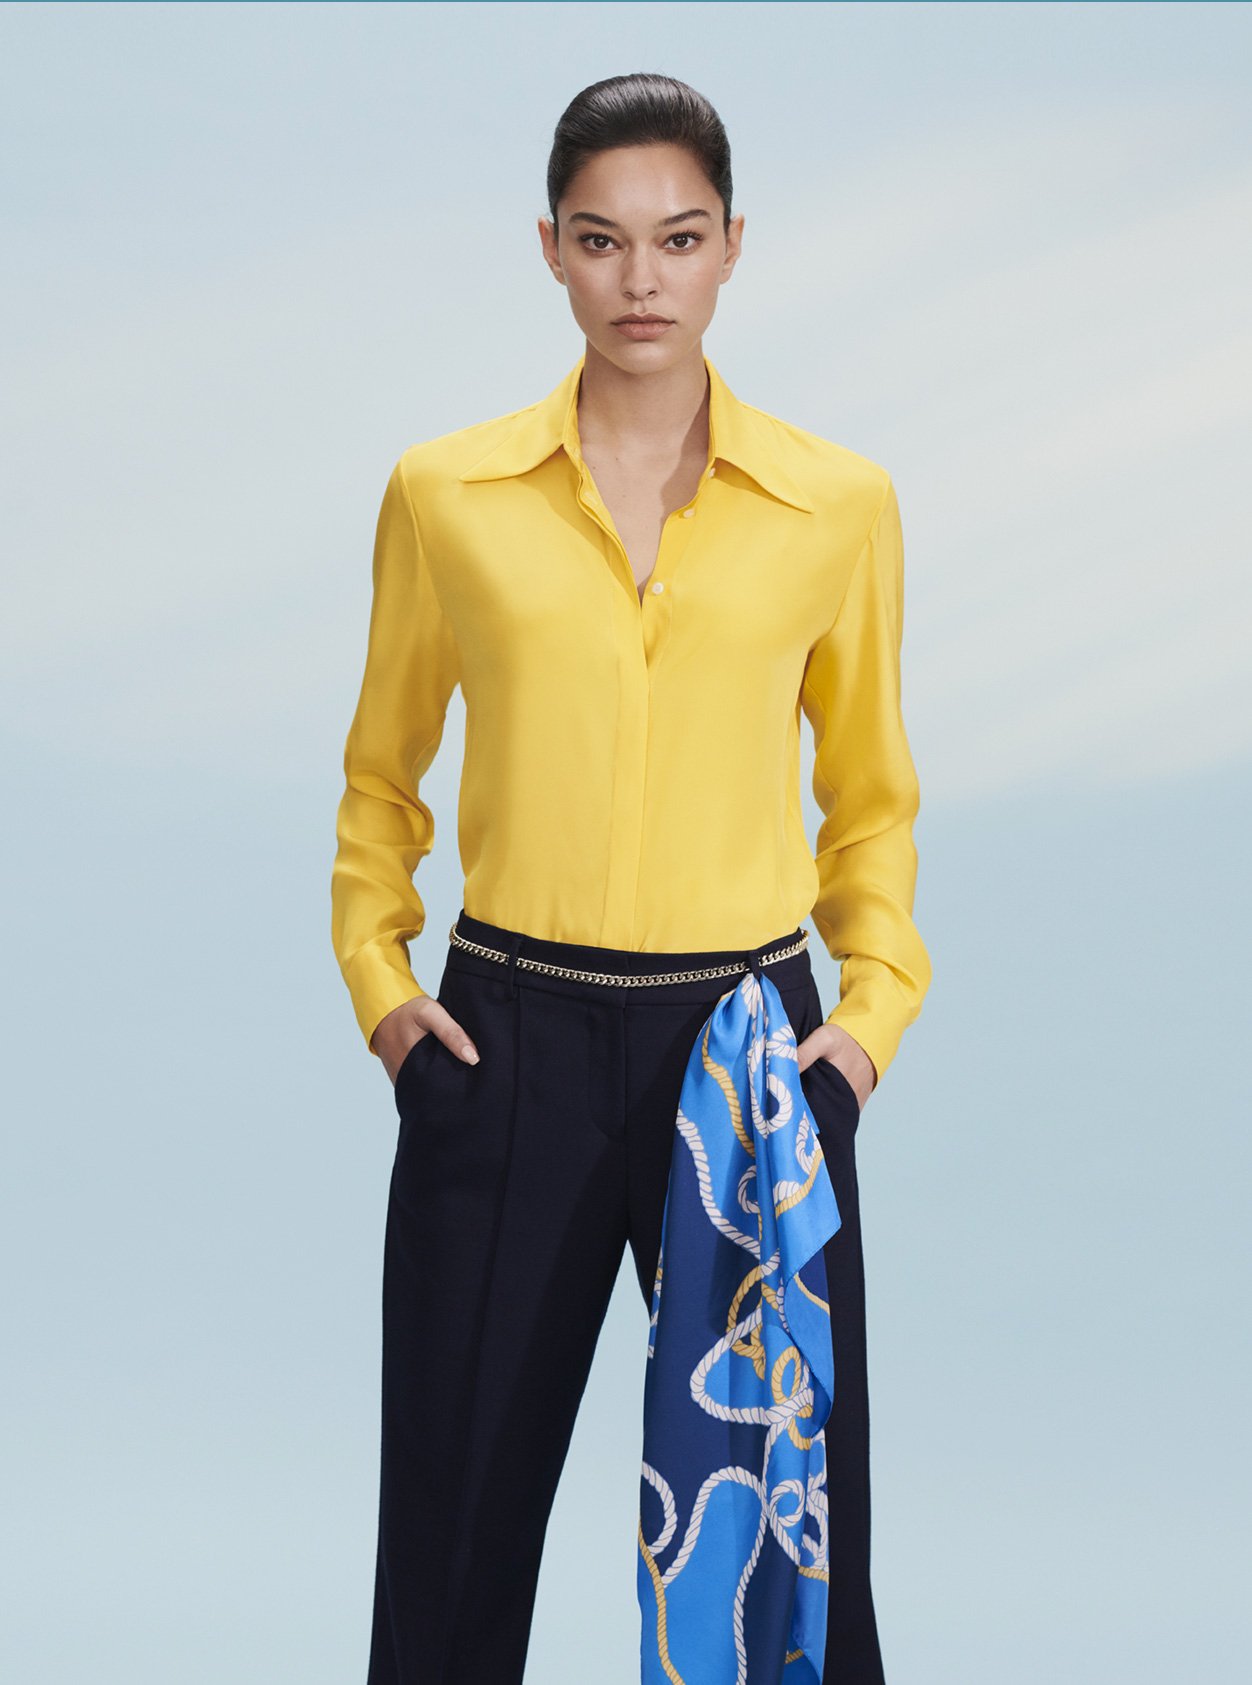 Yellow long-sleeved shirt paired with black work trousers, contrasted by a blue silk scarf draping on the waist, a stylish women’s workwear outfit by Hobbs.